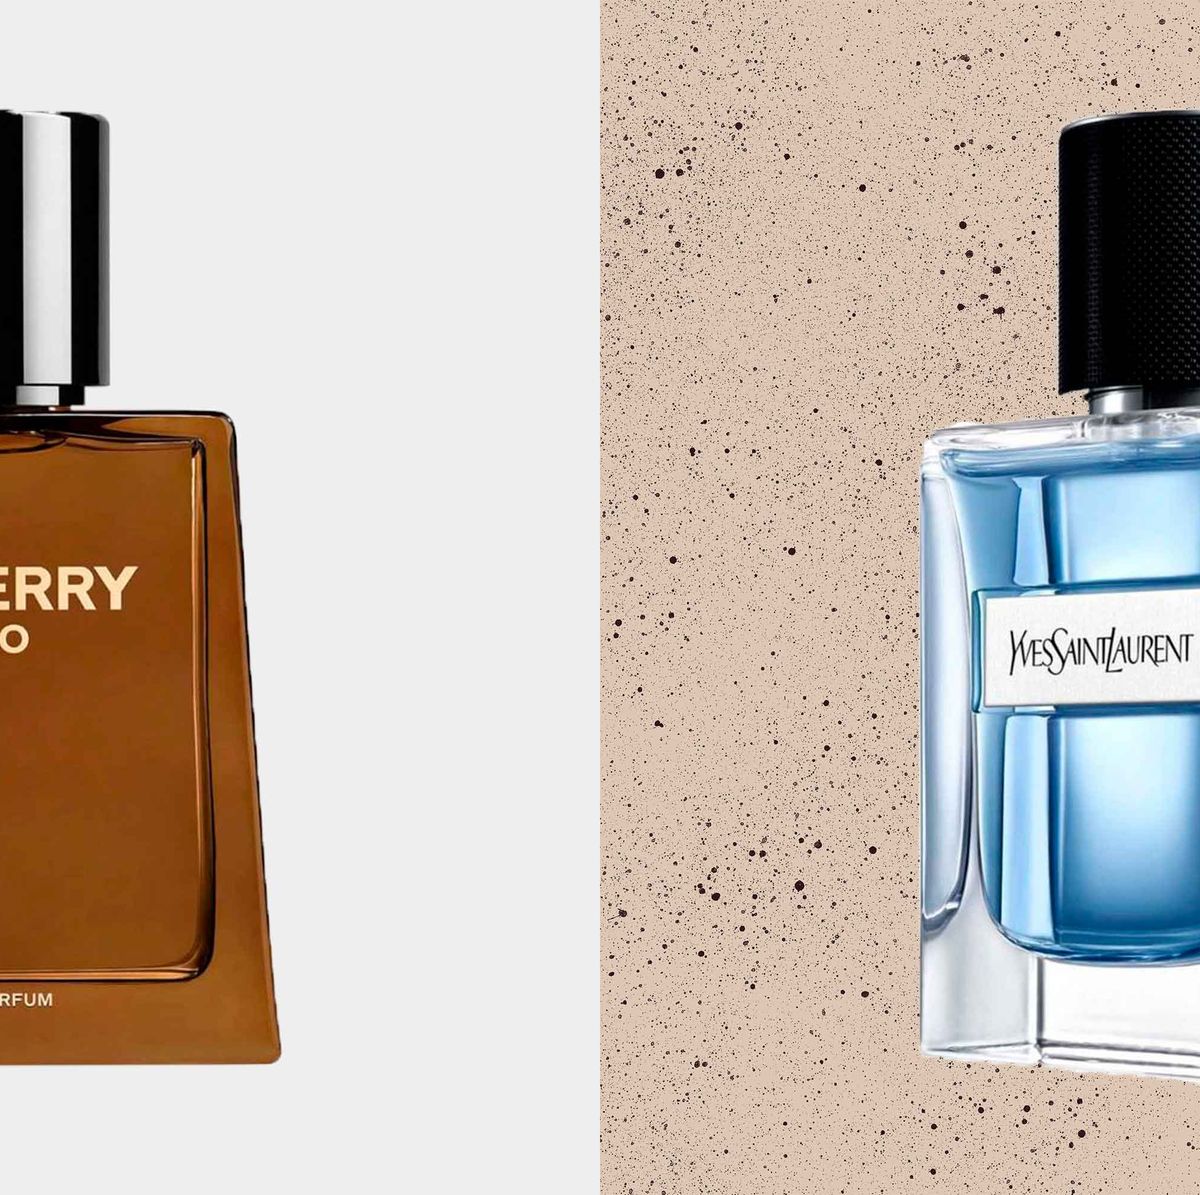 Louis Vuitton just launched its first fragrances for men